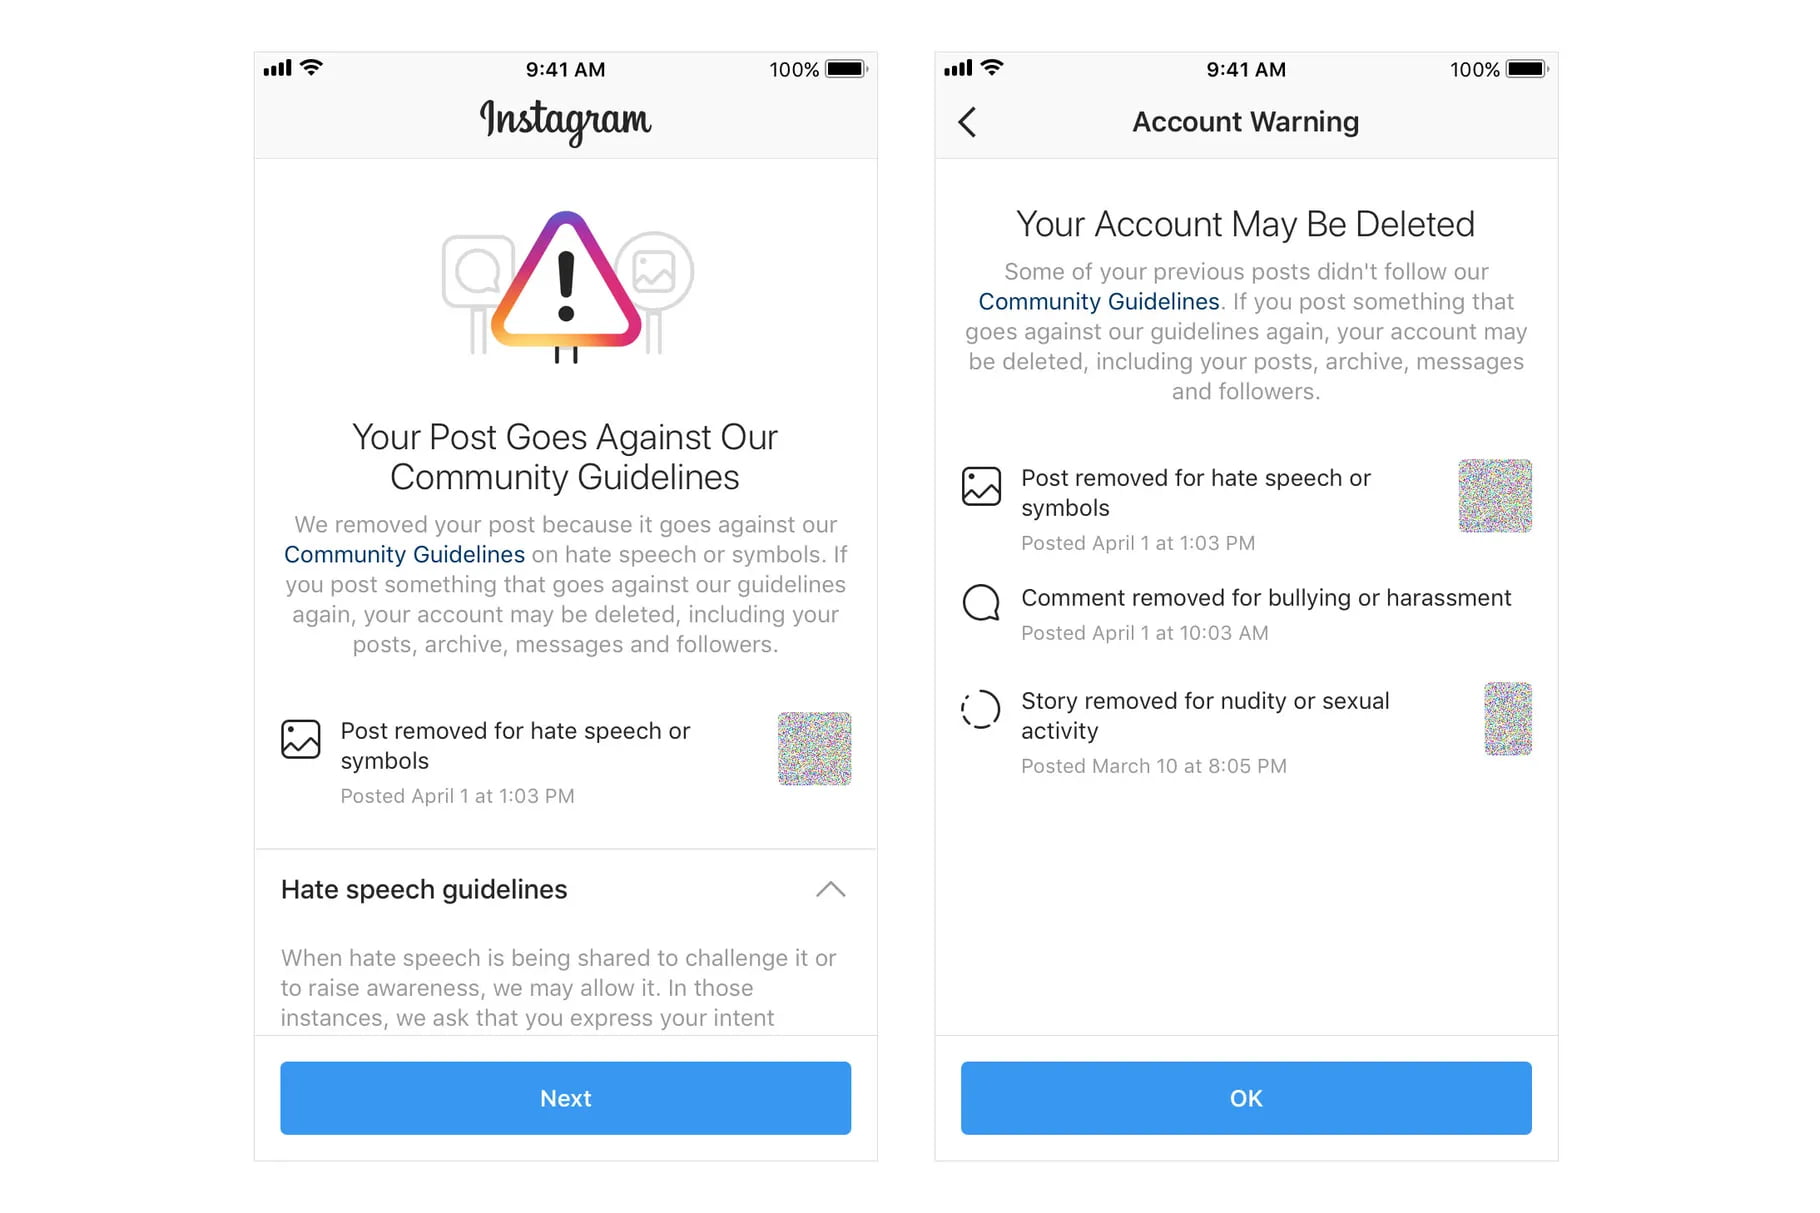 Review Instagram's community guidelines and avoid using banned hashtags or posting prohibited content.
Remove any banned hashtags from your recent posts.